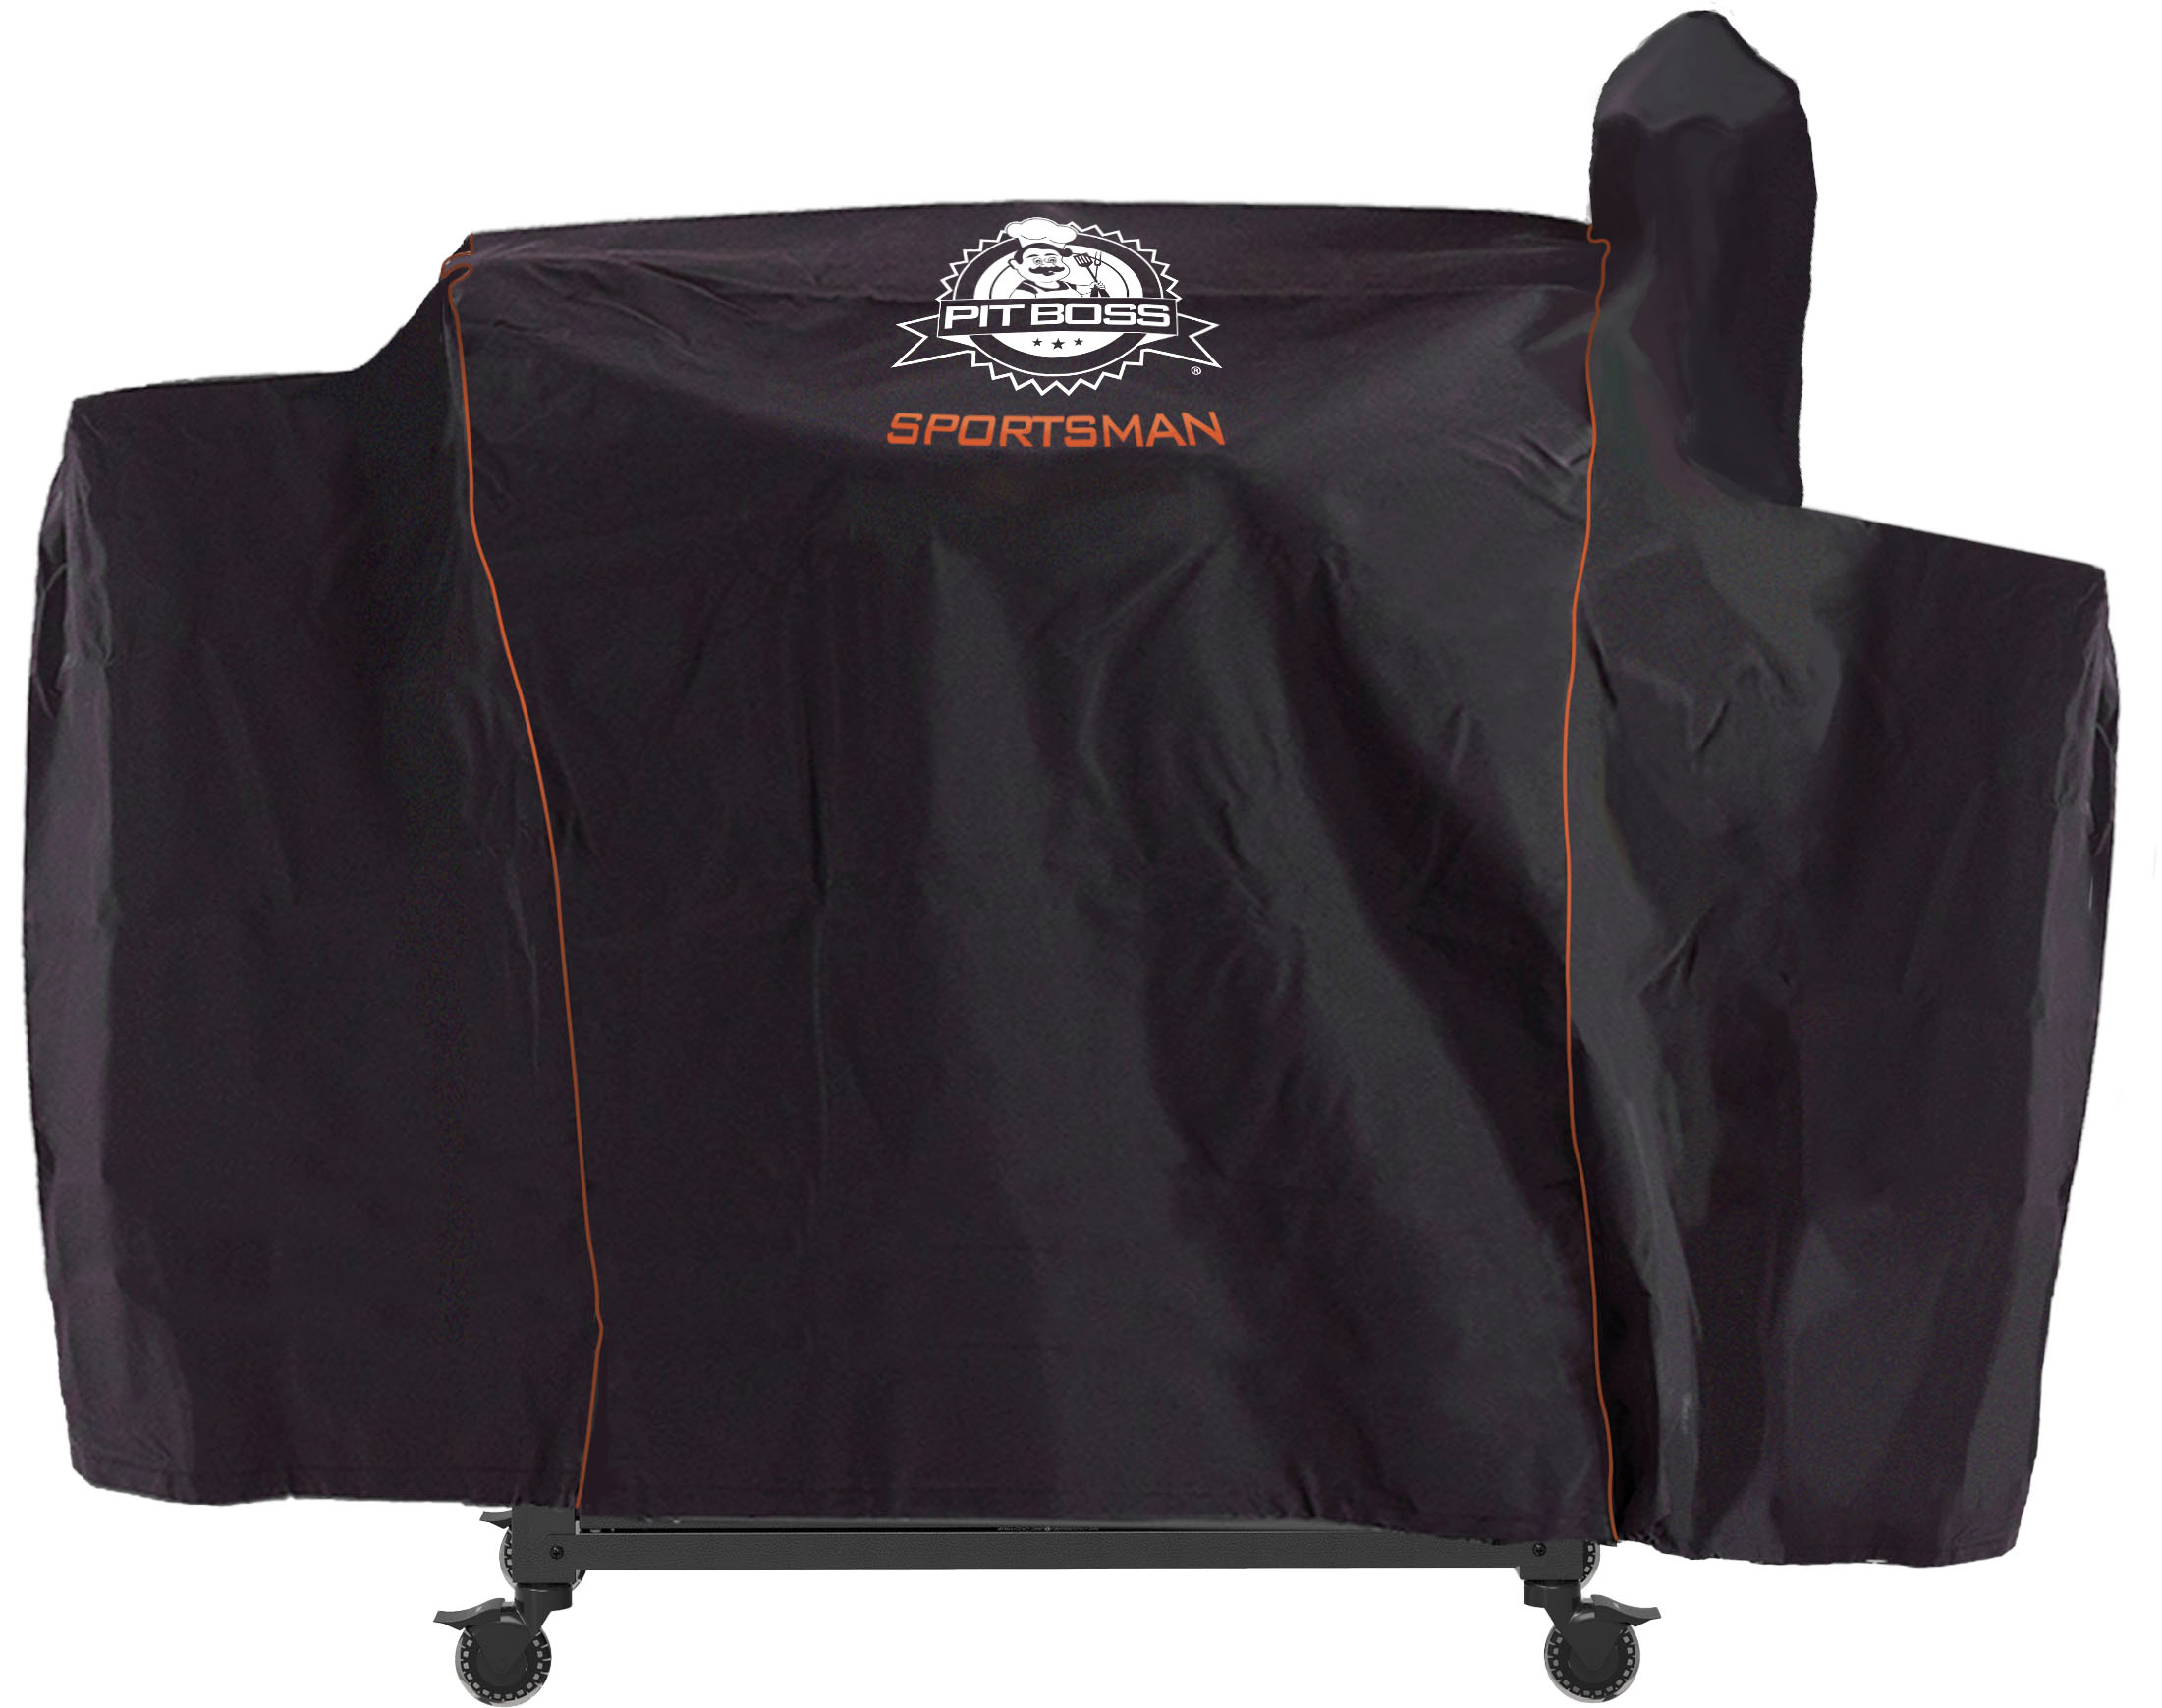 Pit Boss - Sportsman 1100 Grill Cover - Black